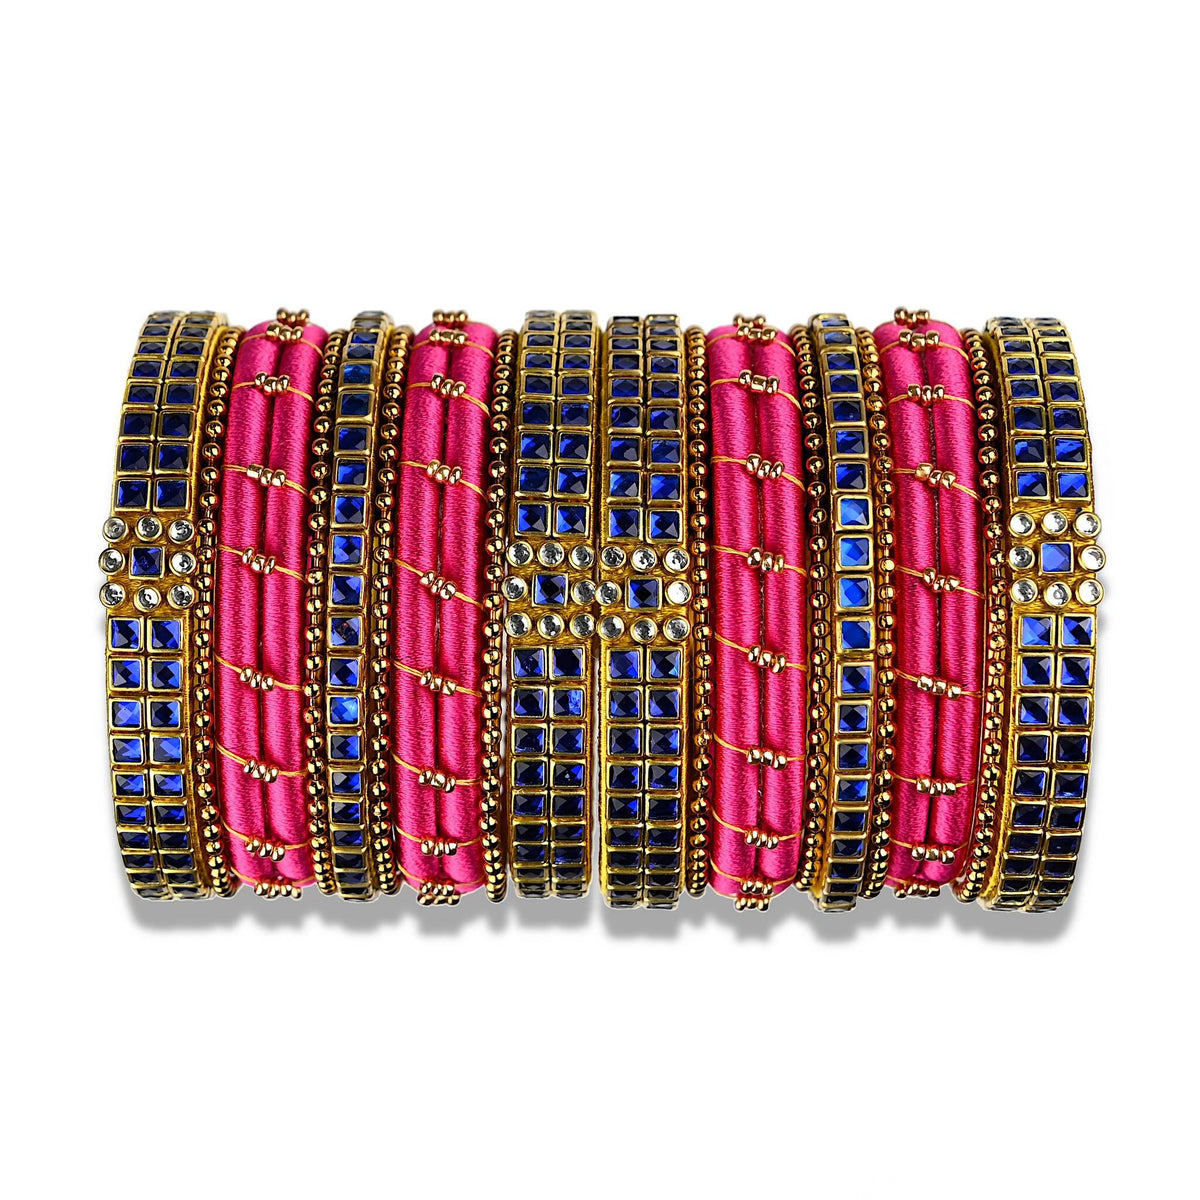 A divine set of silk thread bangles beautifully ornamented with pink silk thread and dark blue kundan stone bezels. The bangles comes in a set of 18 with 9 for each hand.